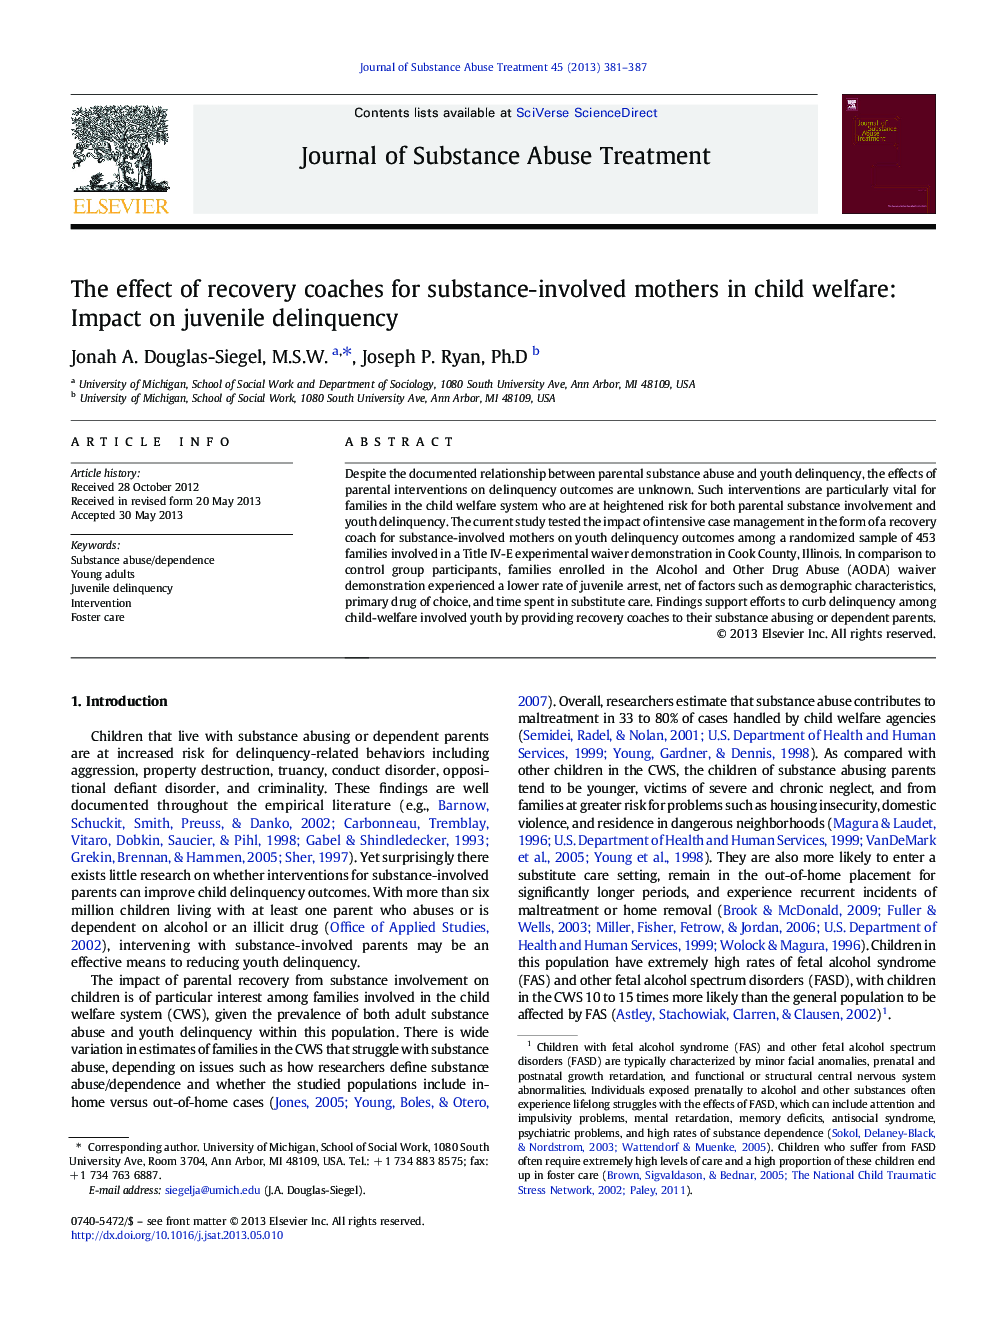 The effect of recovery coaches for substance-involved mothers in child welfare: Impact on juvenile delinquency